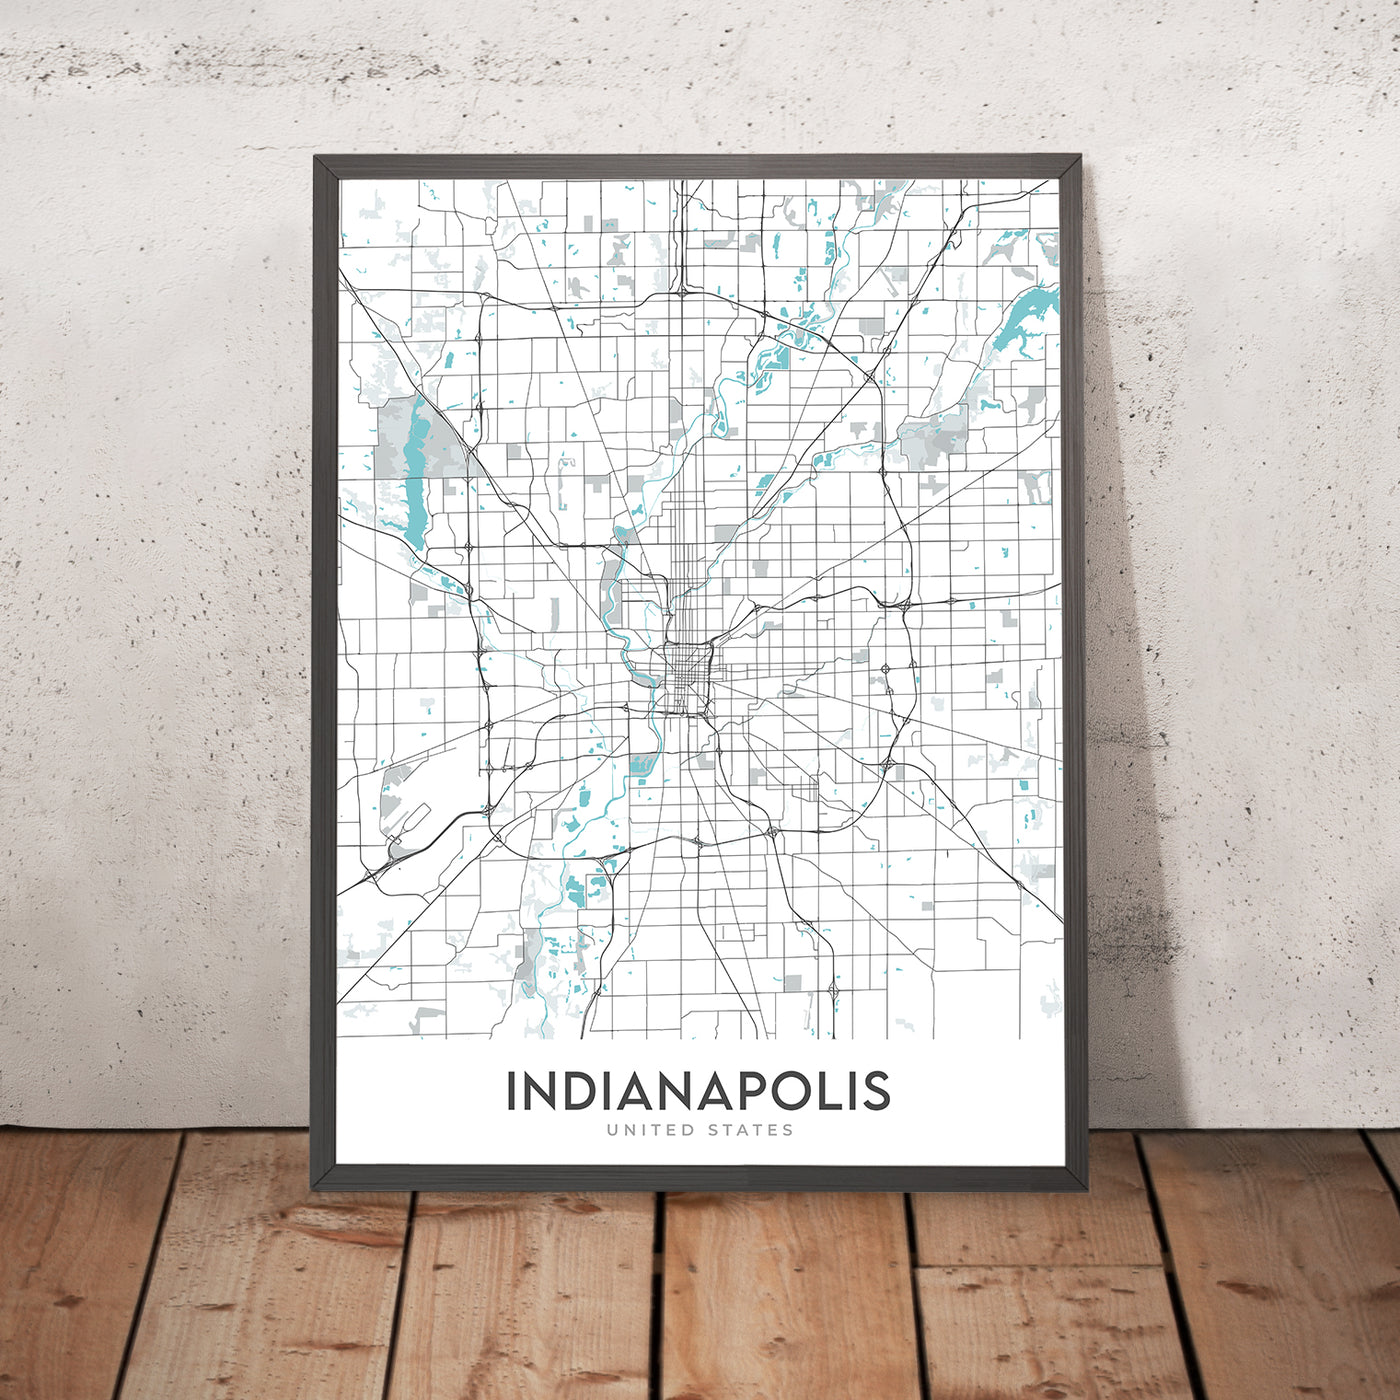 Modern City Map of Indianapolis, IN: Downtown, White River State Park, Indianapolis Zoo, Broad Ripple, Speedway